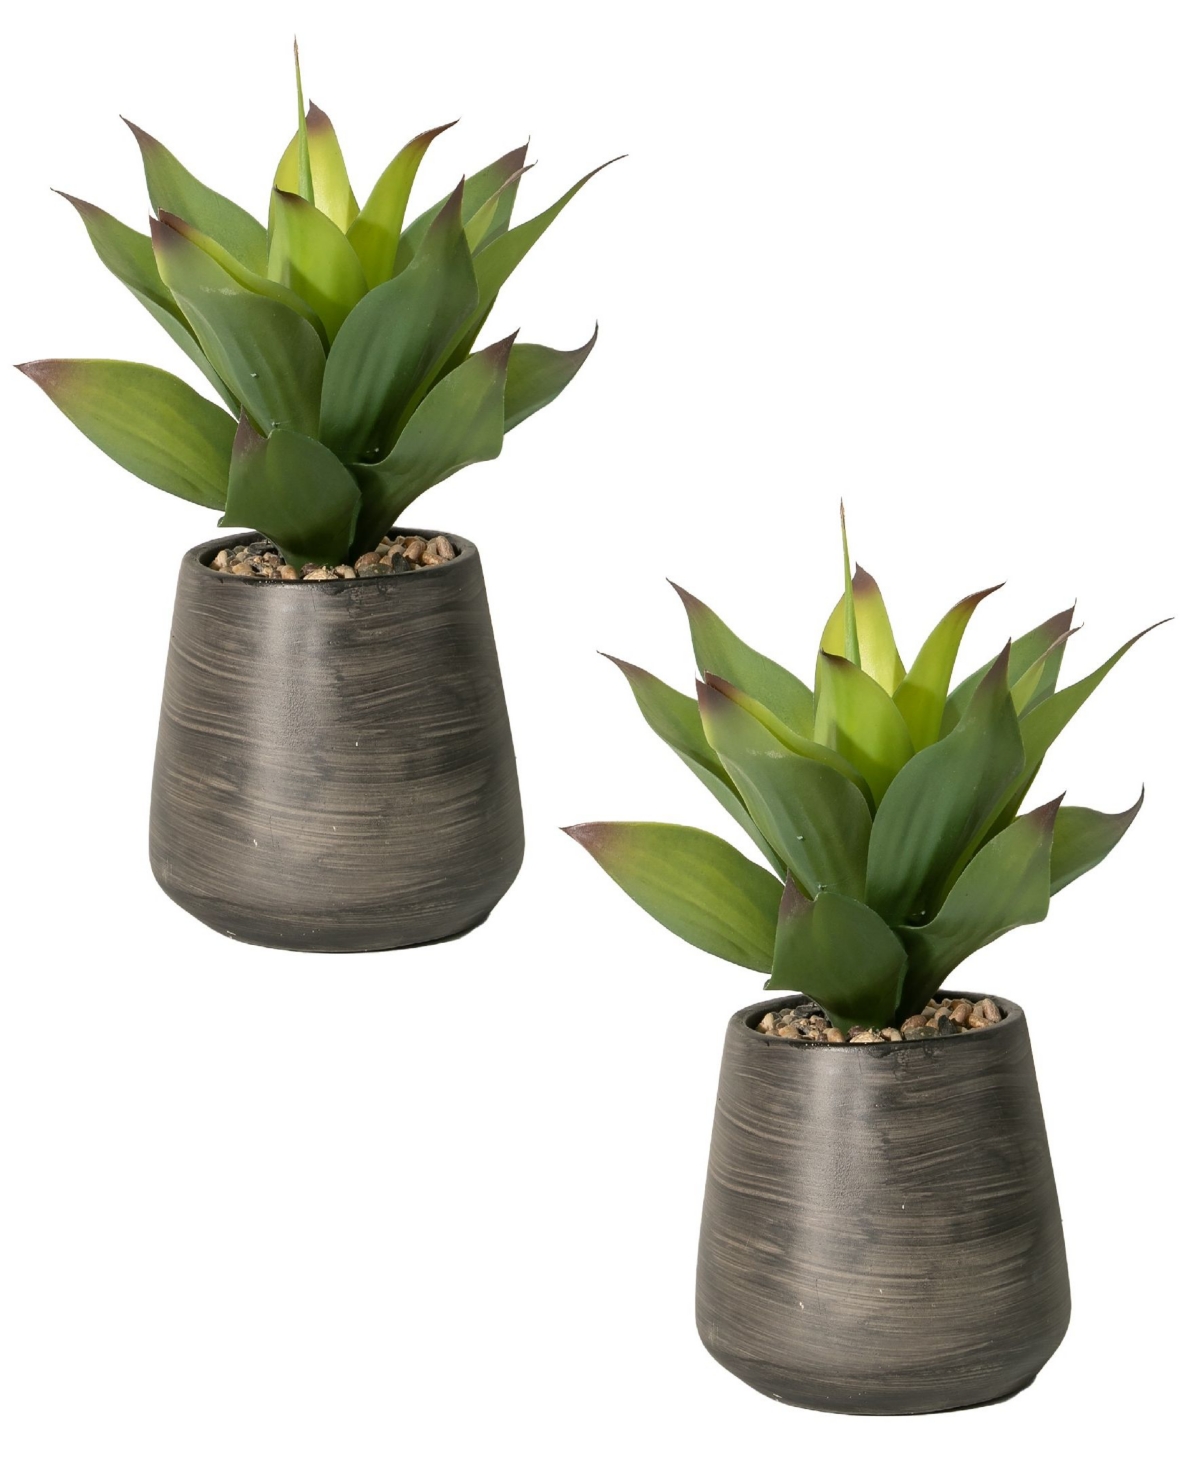 16" Tall Realistic Agave Plant in Cement Vase, Pack of 2 - Green